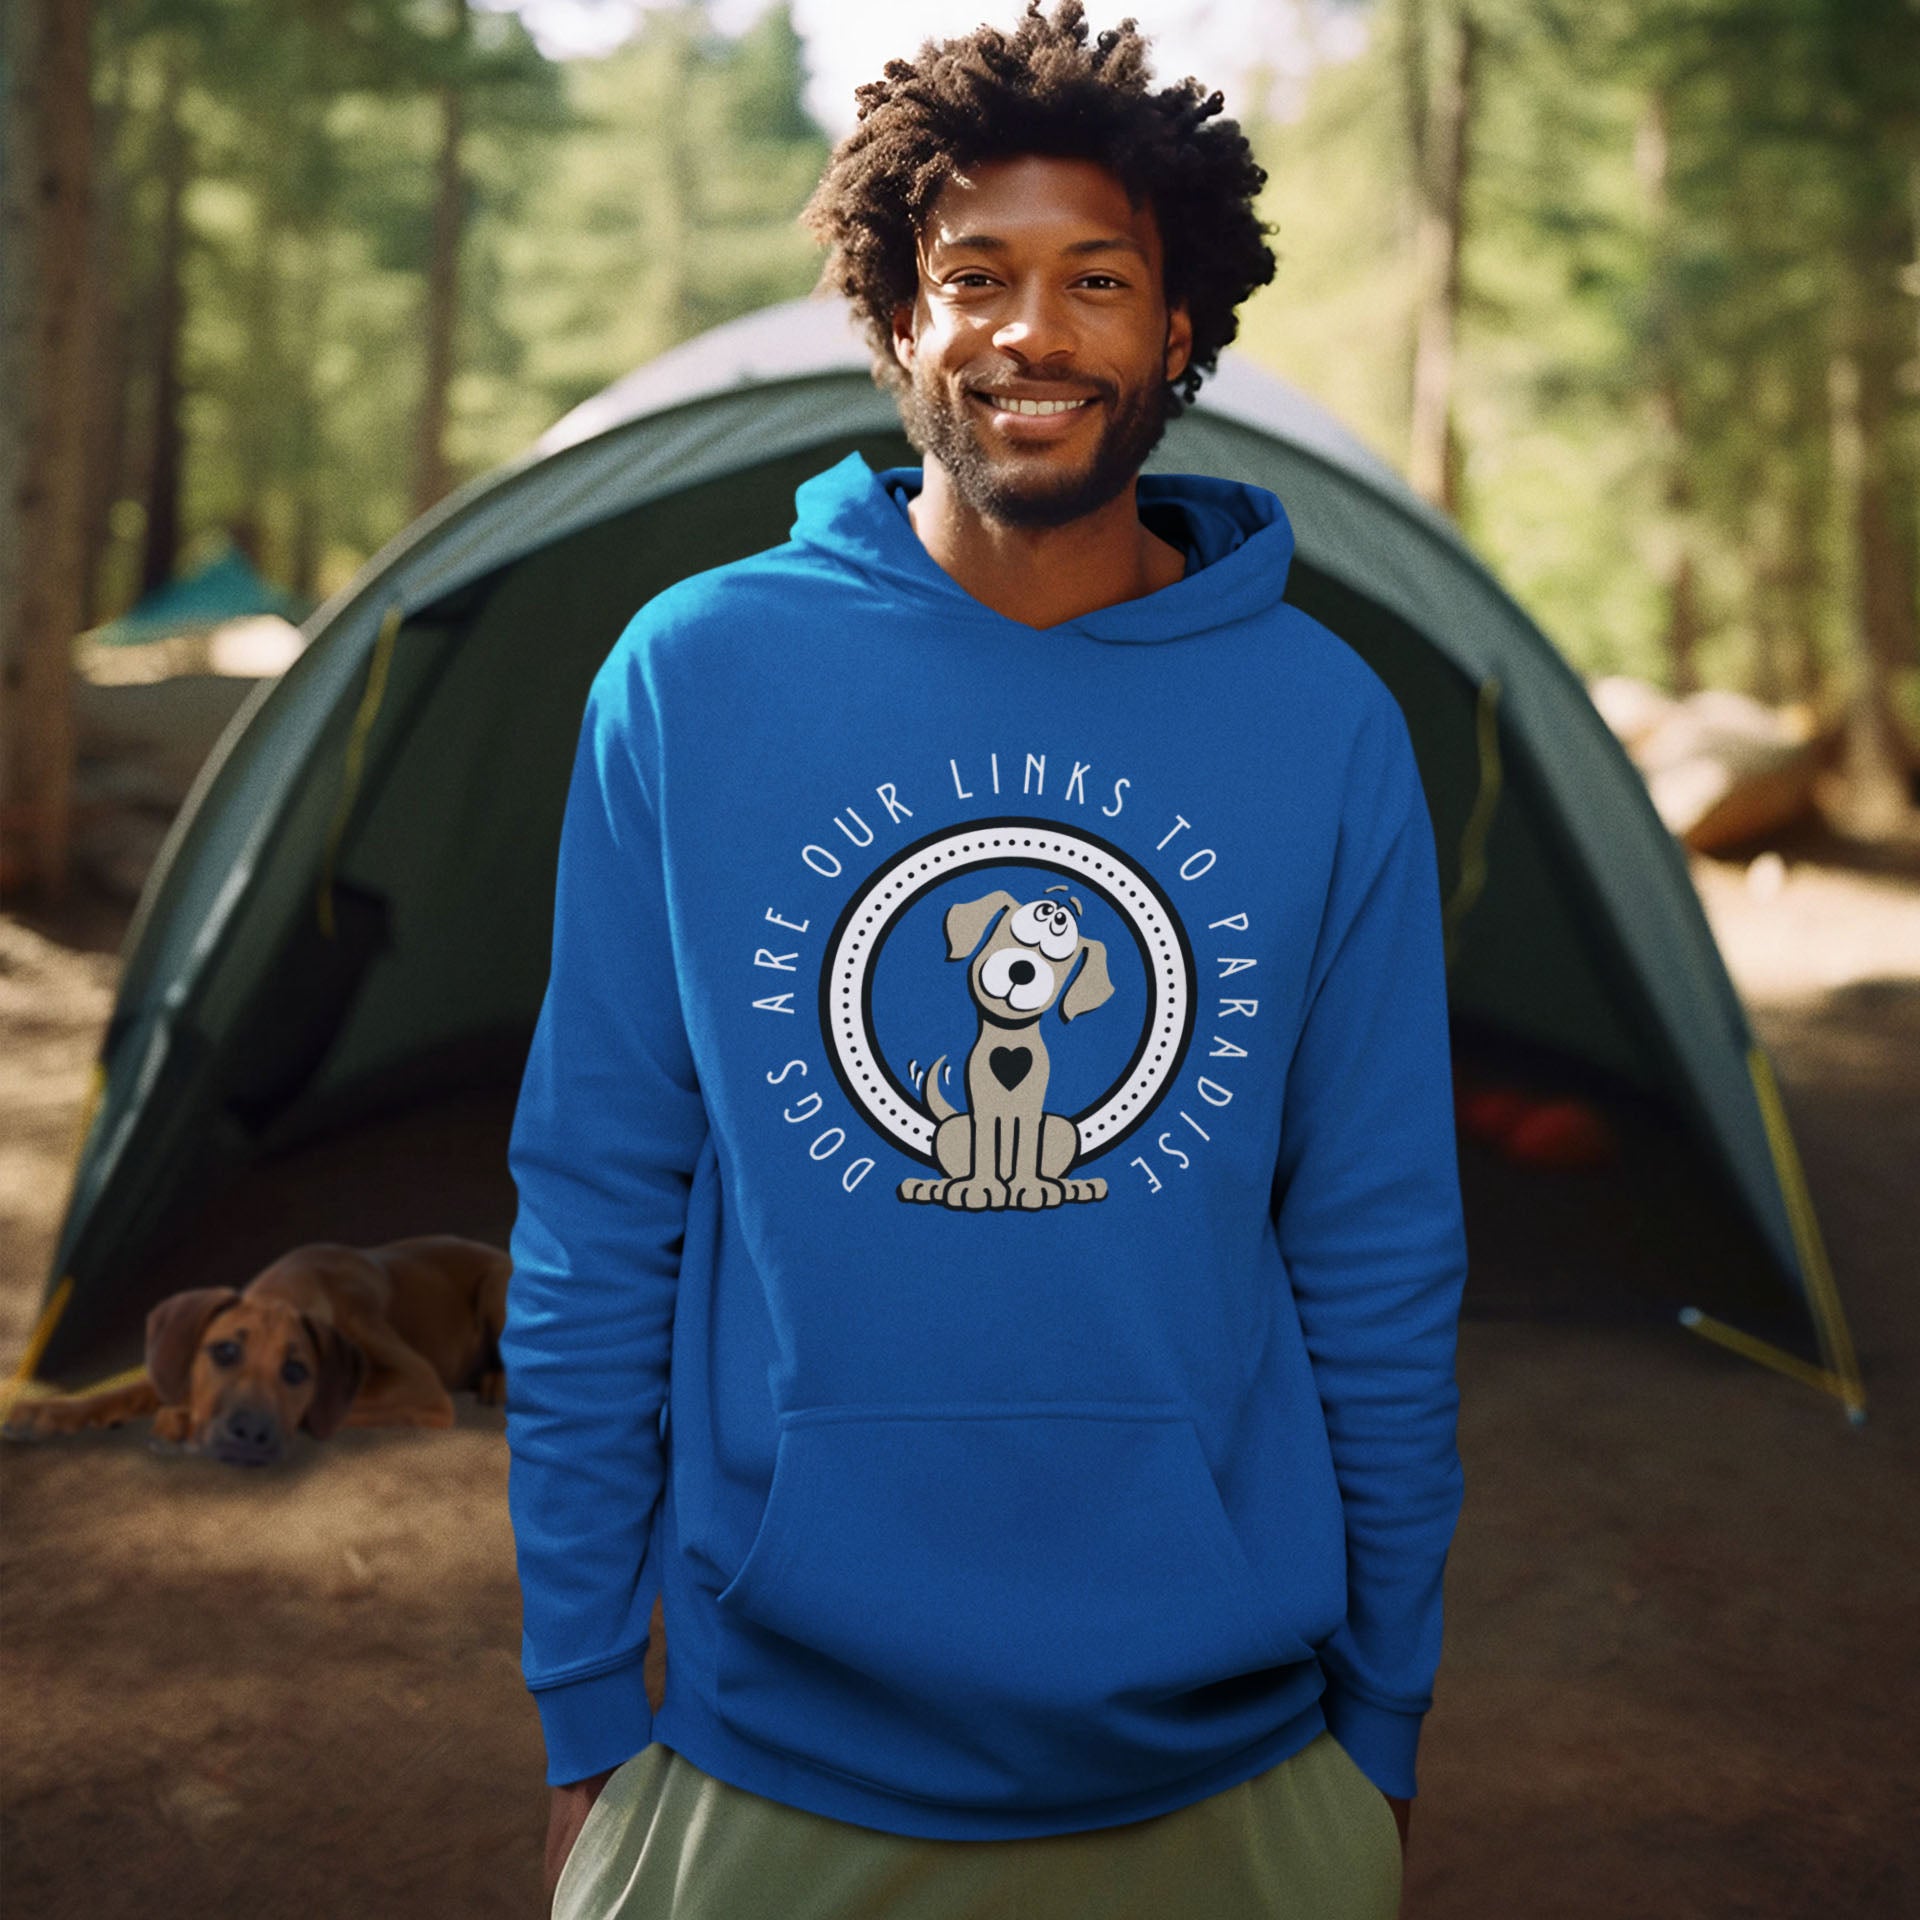  A man, donning a royal blue 'Dogs are Paradise' hoodie by Dogs Pure Love, stands with a smile, hands casually tucked in his pockets. In the background, his dog rests partially inside a tent in a forest setting.